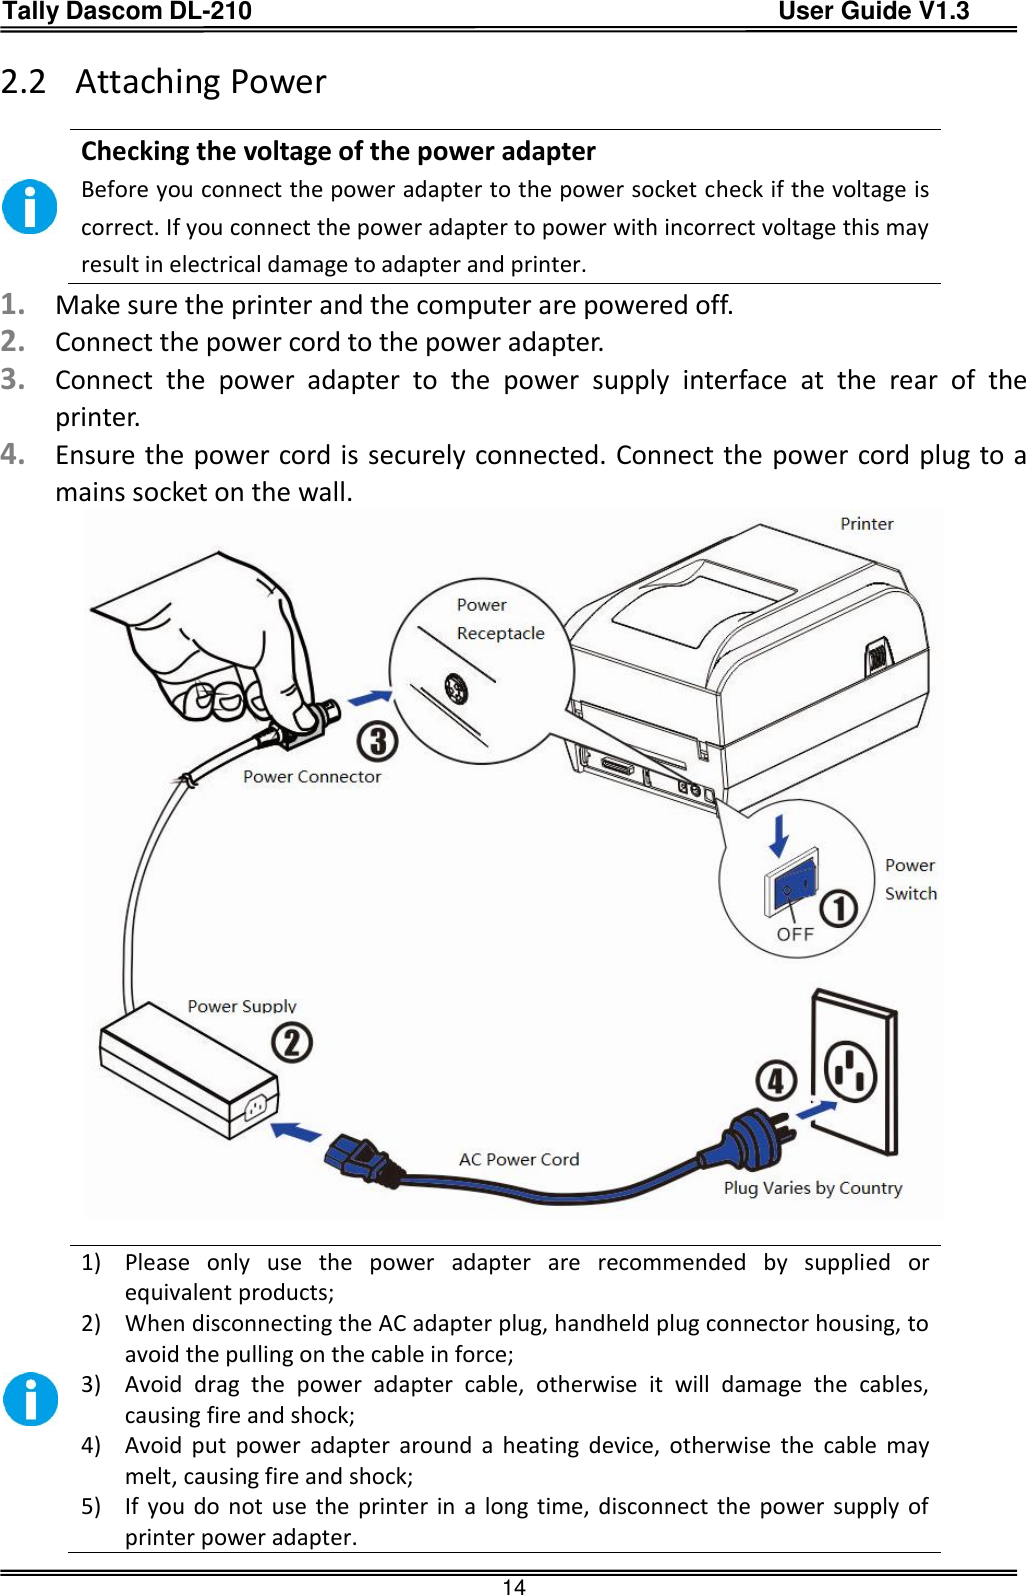 Tally Dascom DL-210                                          User Guide V1.3  14 2.2 Attaching Power   Checking the voltage of the power adapter Before you connect the power adapter to the power socket check if the voltage is correct. If you connect the power adapter to power with incorrect voltage this may result in electrical damage to adapter and printer. 1. Make sure the printer and the computer are powered off. 2. Connect the power cord to the power adapter. 3. Connect  the  power  adapter  to  the  power  supply  interface  at  the  rear  of  the printer. 4. Ensure the power cord is securely connected. Connect the power cord plug to a mains socket on the wall.    1) Please  only  use  the  power  adapter  are  recommended  by  supplied  or equivalent products; 2) When disconnecting the AC adapter plug, handheld plug connector housing, to avoid the pulling on the cable in force; 3) Avoid  drag  the  power  adapter  cable,  otherwise  it  will  damage  the  cables, causing fire and shock; 4) Avoid  put  power  adapter  around  a  heating  device,  otherwise  the  cable  may melt, causing fire and shock; 5) If you do not use  the printer in a long time, disconnect the power supply  of printer power adapter. 